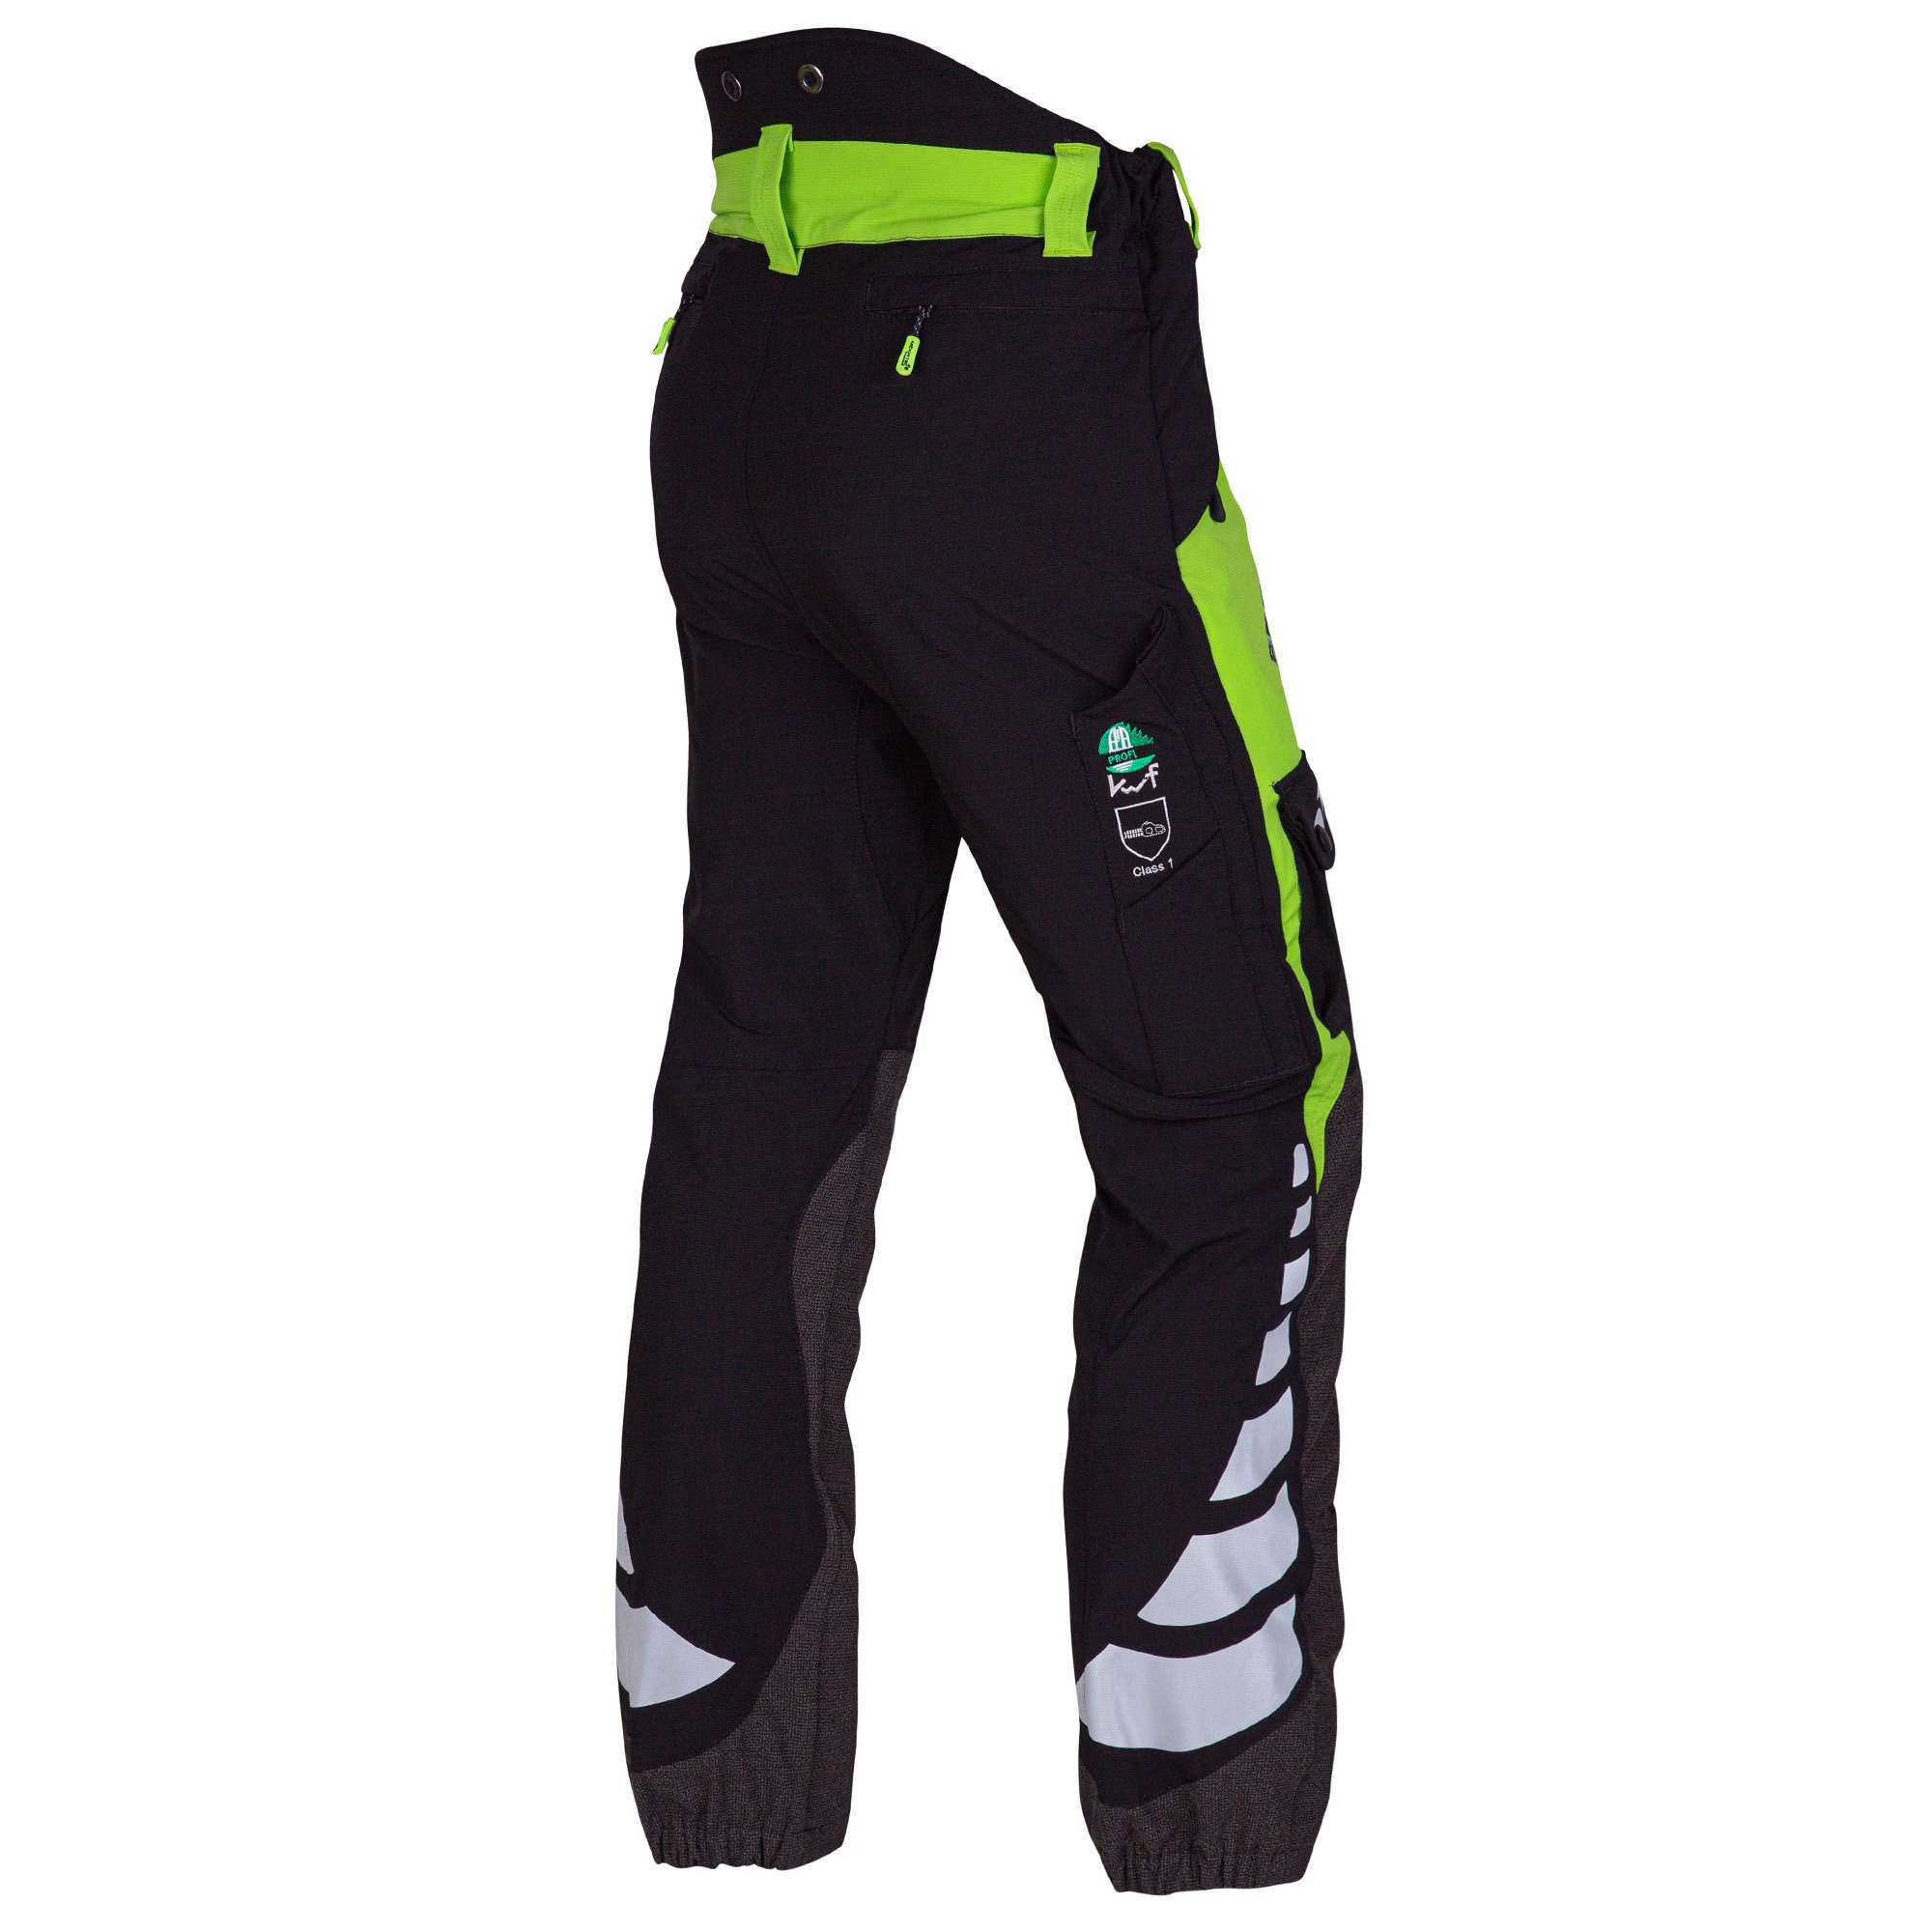 AT4015 Breatheflex Chainsaw Trousers Design A Plus Class 1 - Lime